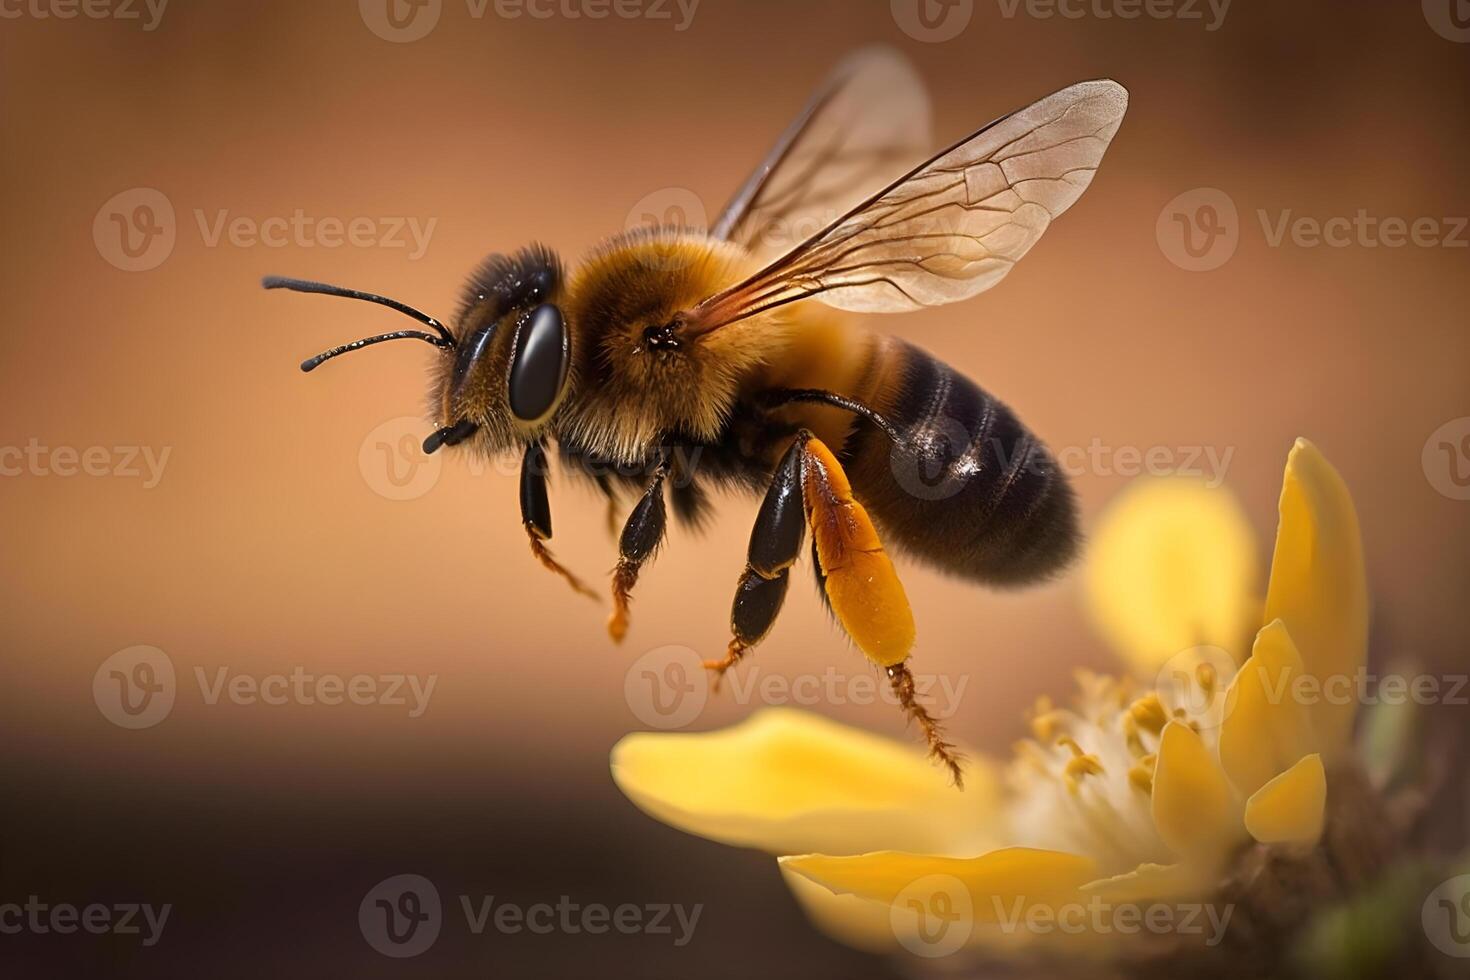 Closeup view of honey bee on the table, in a flight and on honeycomb. Useful insect photo